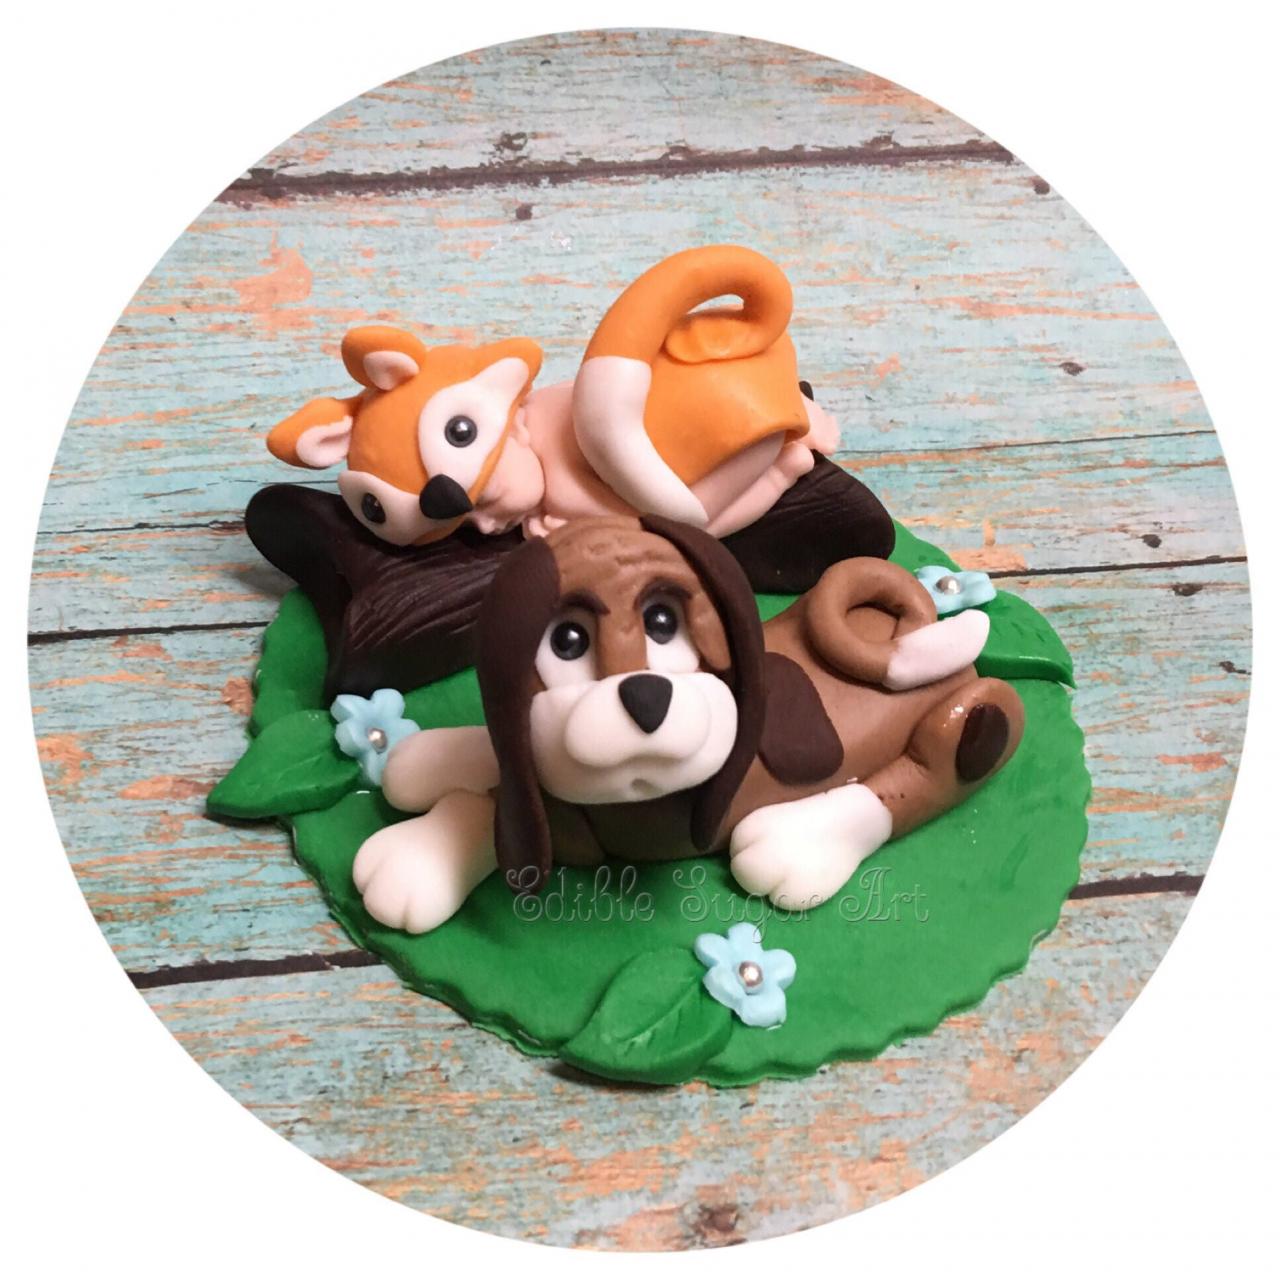 FOX AND HOUND BabY Shower Cake Topper Fondant Moose cake Bear Forest animal woodland nursery topper camo baby pink camo